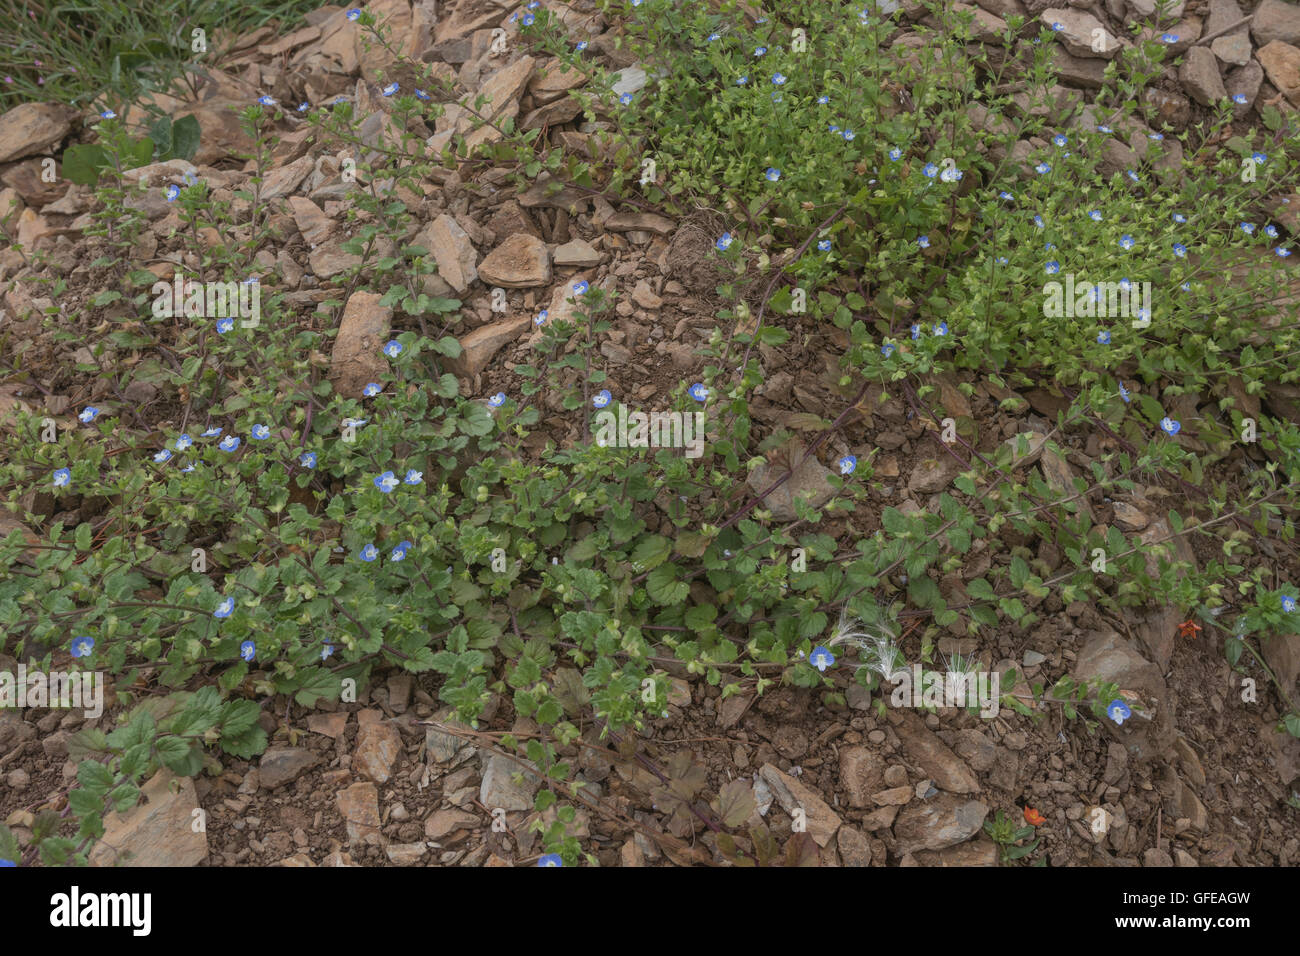 Field Speedwell / Veronica persica - a low sprawling hairy annual weed seen straggling over some stony ground. Stock Photo